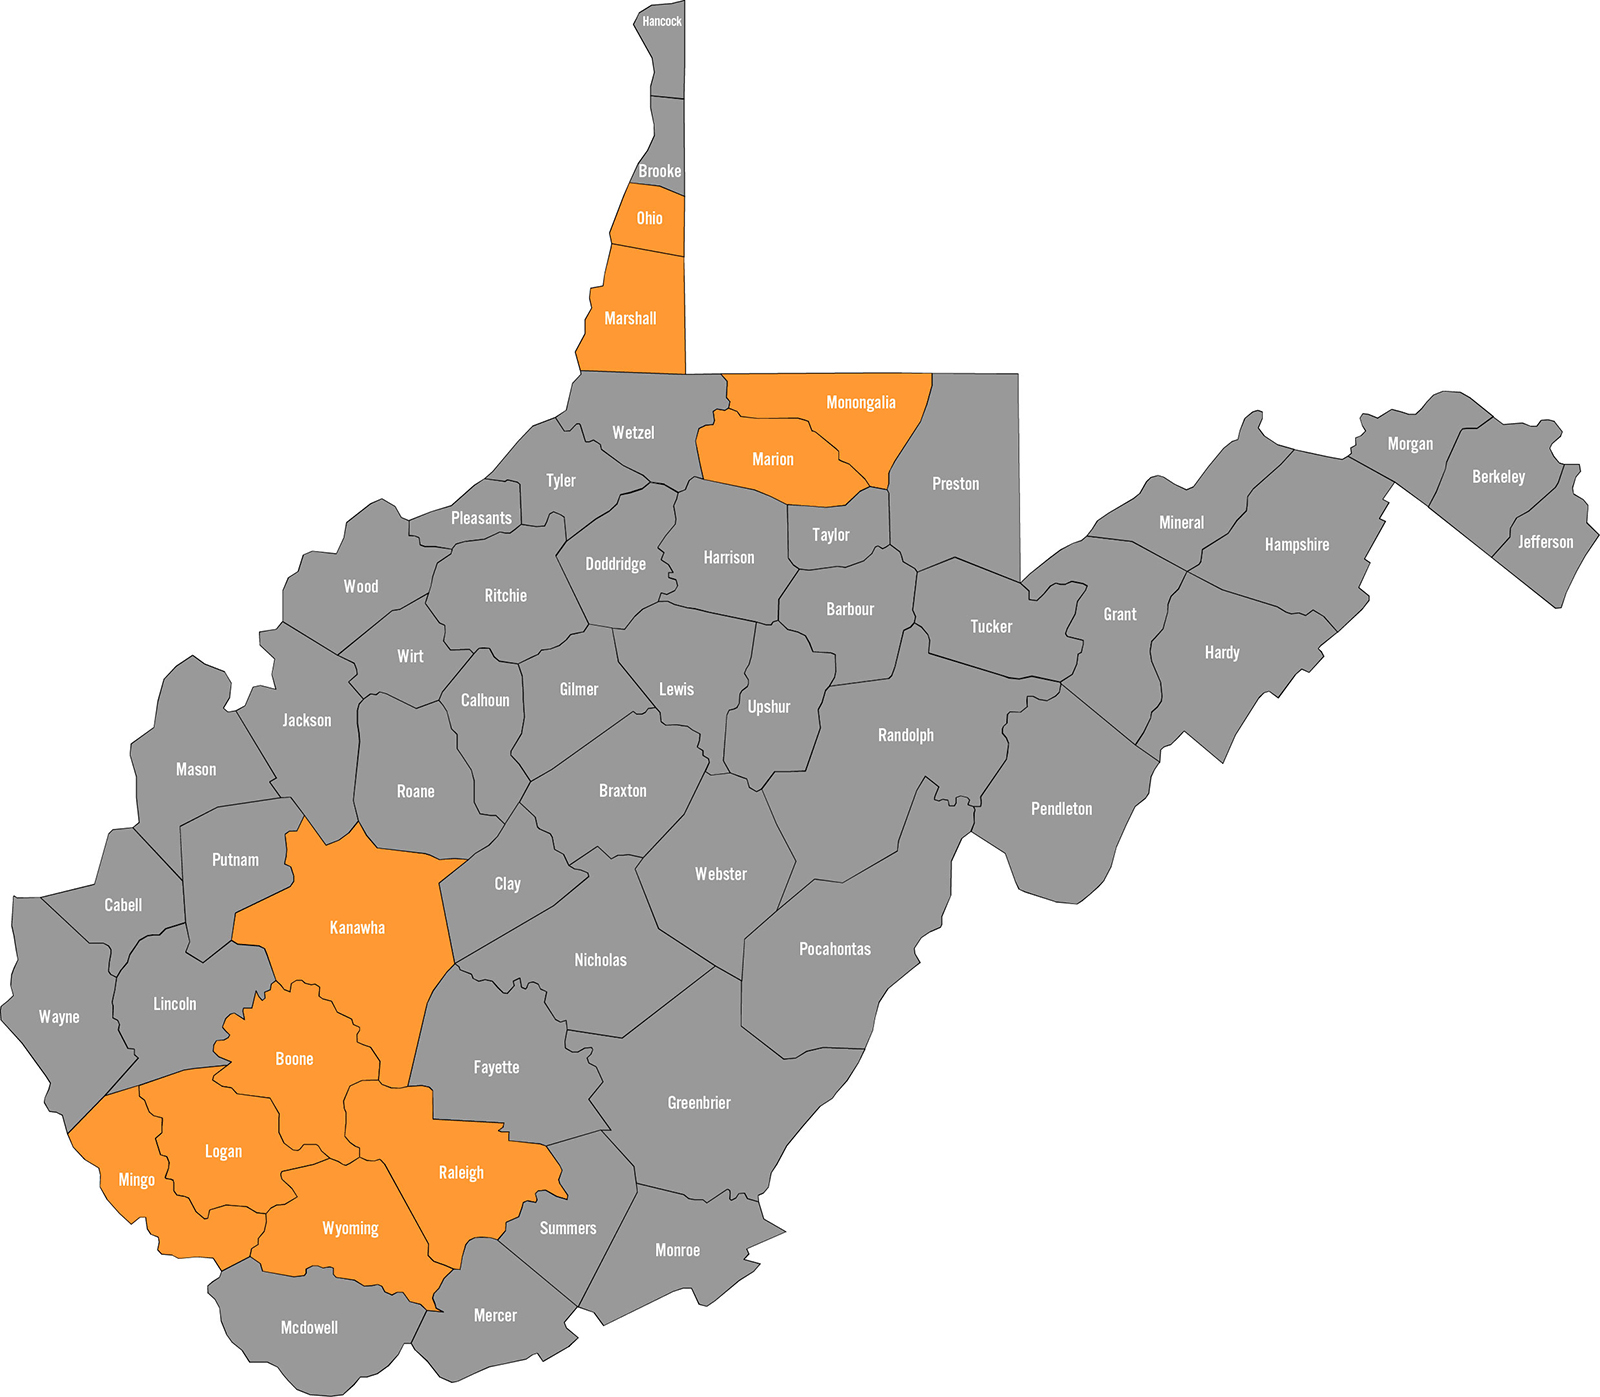 boone-county-wv-property-tax-records-property-walls